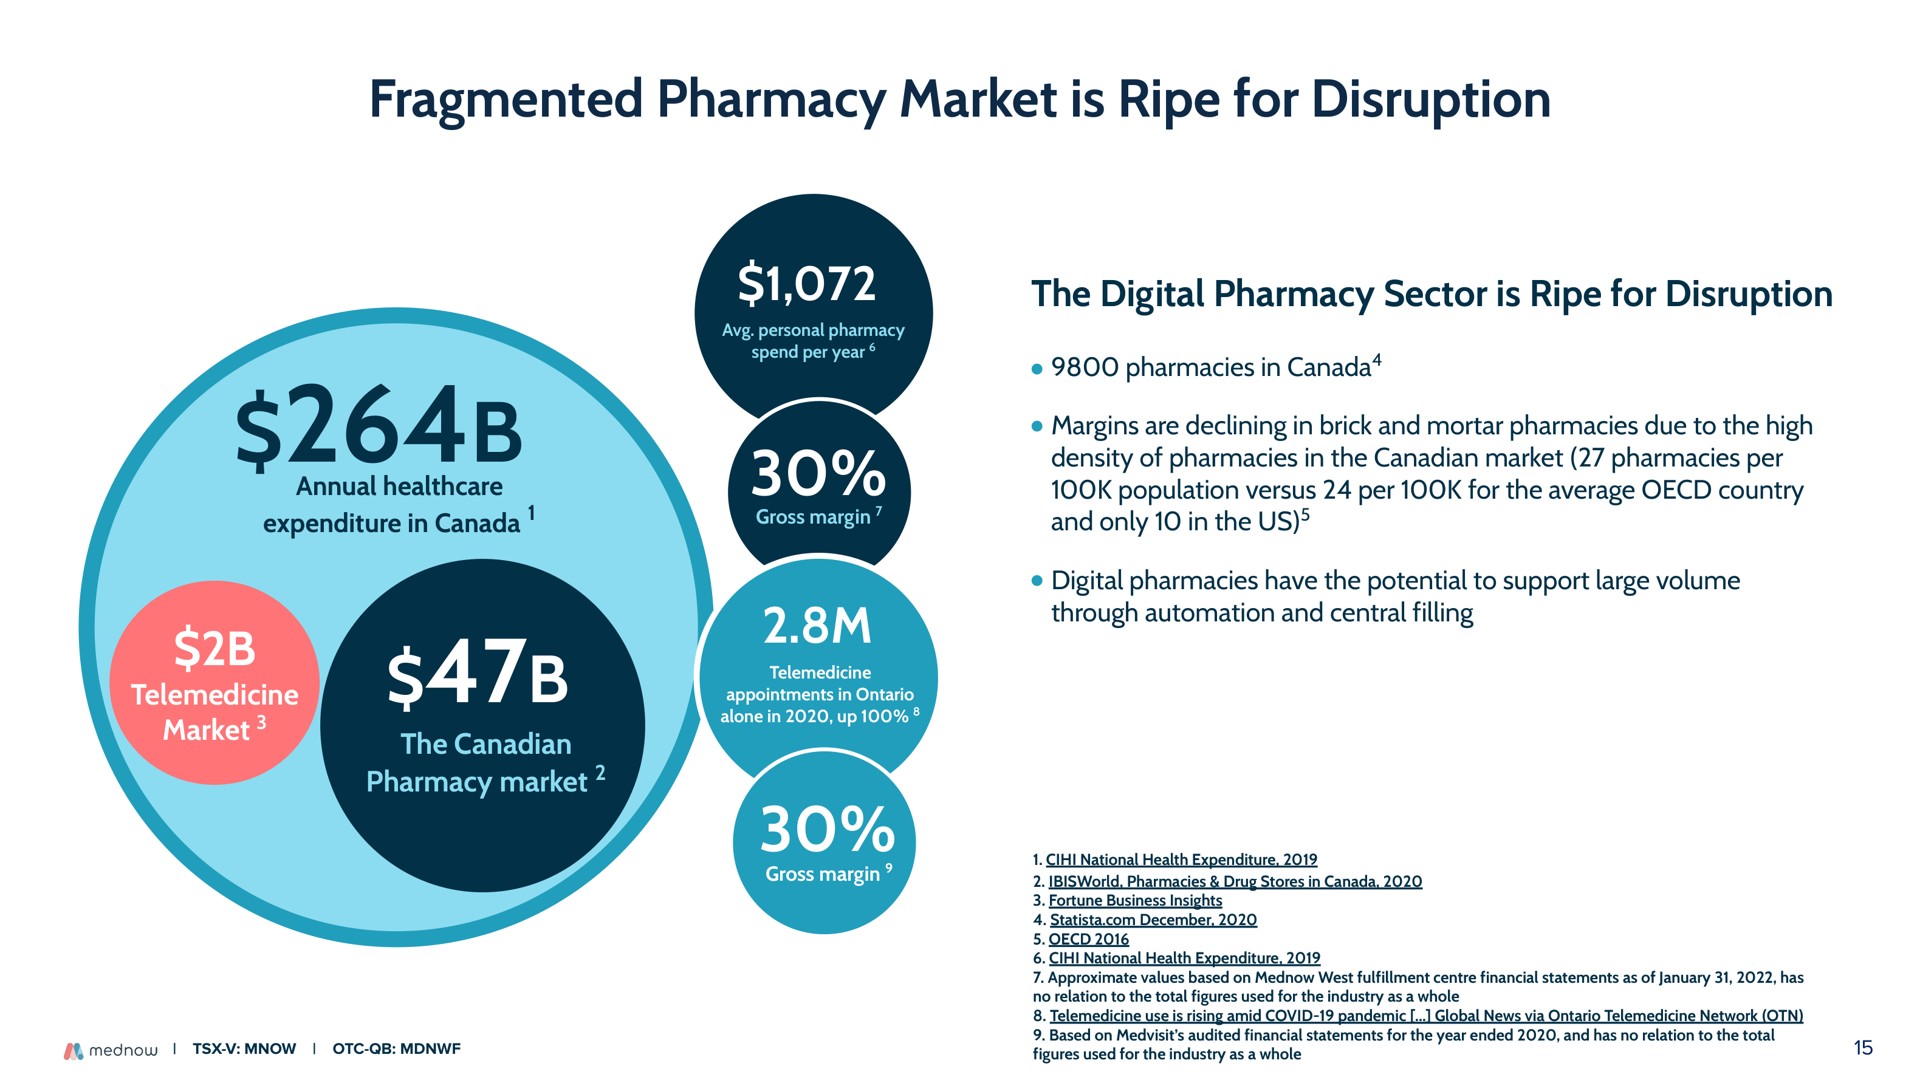 fragmented pharmacy market is ripe for disruption | Mednow